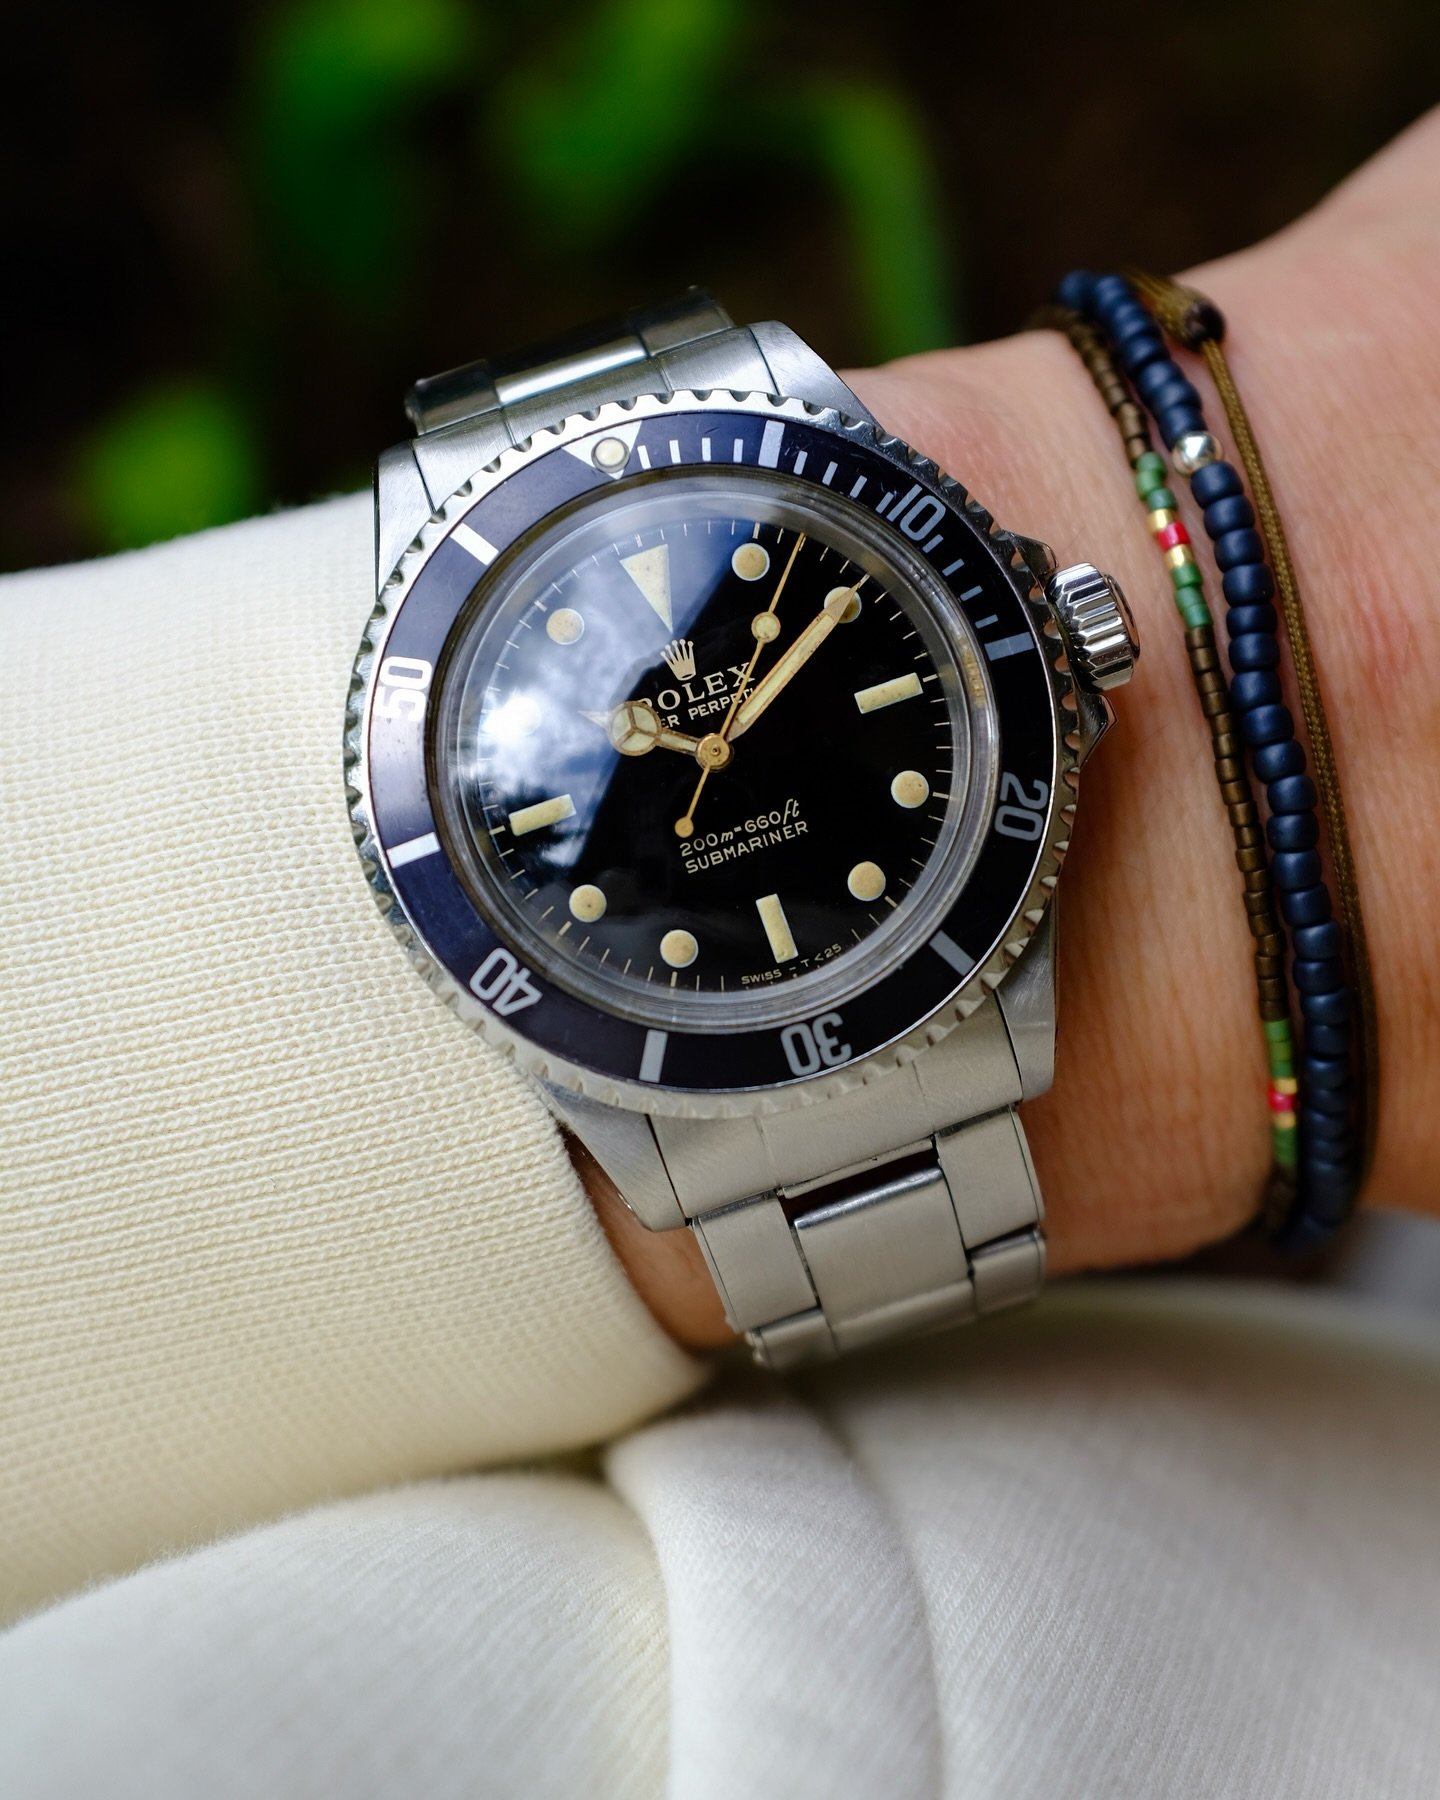 When the gilt actually looks like gilt. 

-1966 Rolex Submariner 5513